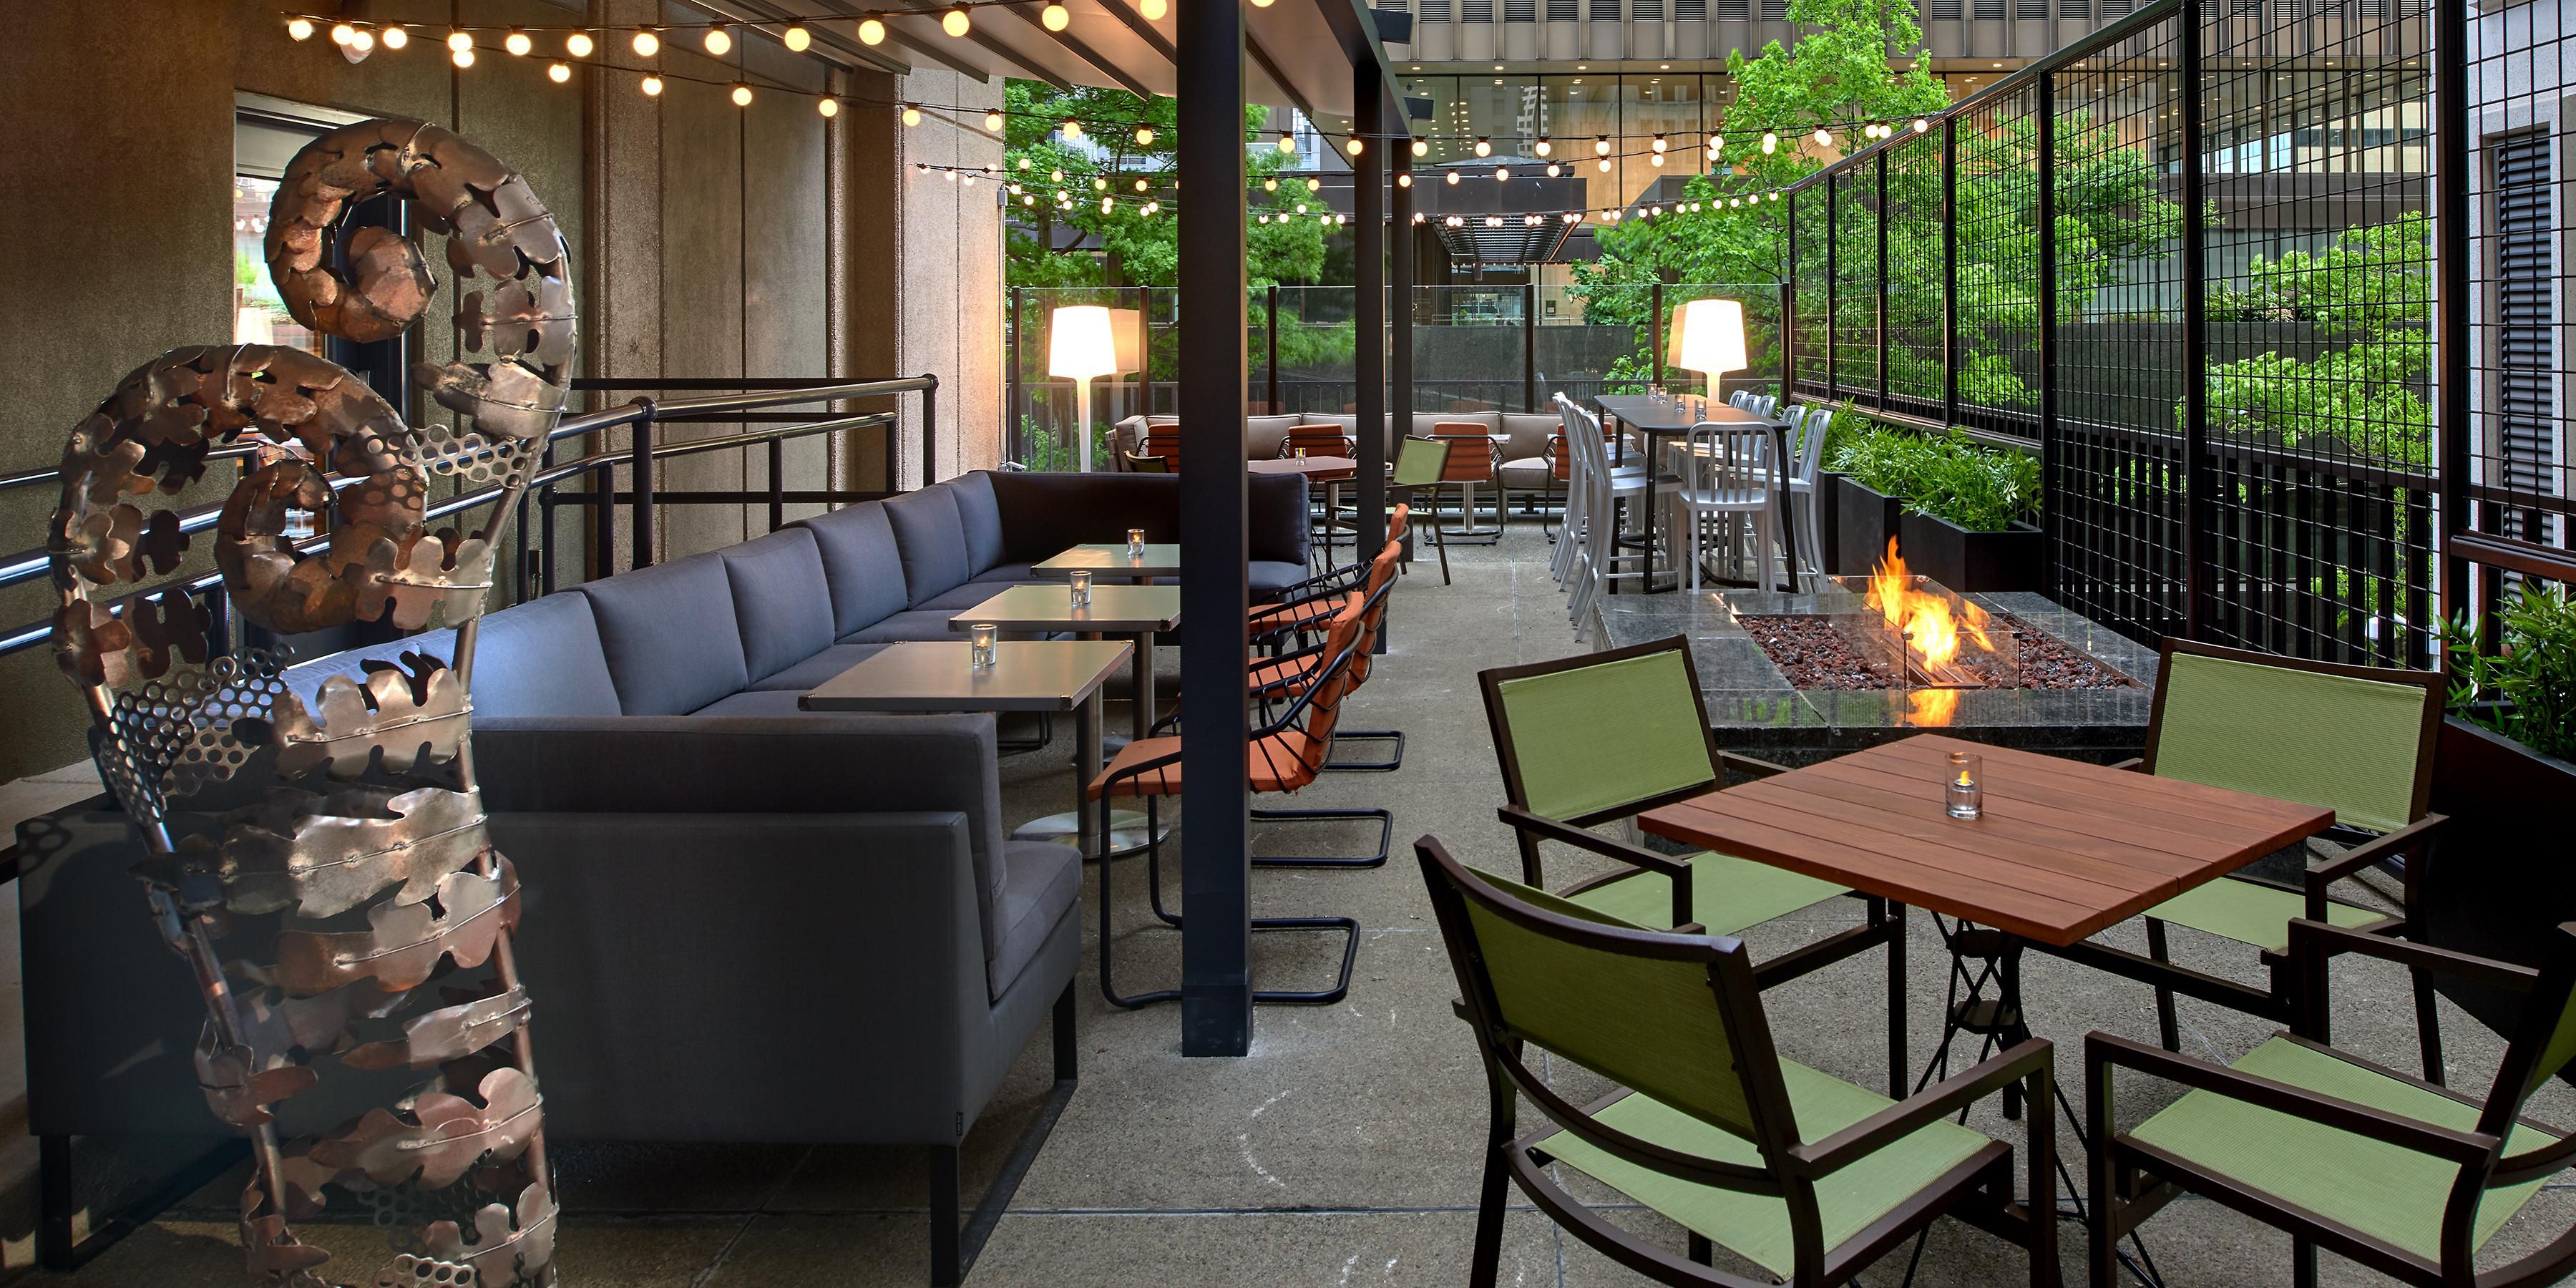 Who says “outdoor dining” and “Seattle” don’t go together? Not us. Thanks to a retractable roof, fire pits and outdoor heaters, Outlier’s spacious, bustling patio stays comfortable from spring to fall. Enjoy alfresco dining anytime at one of downtown Seattle’s few outdoor dining spaces.